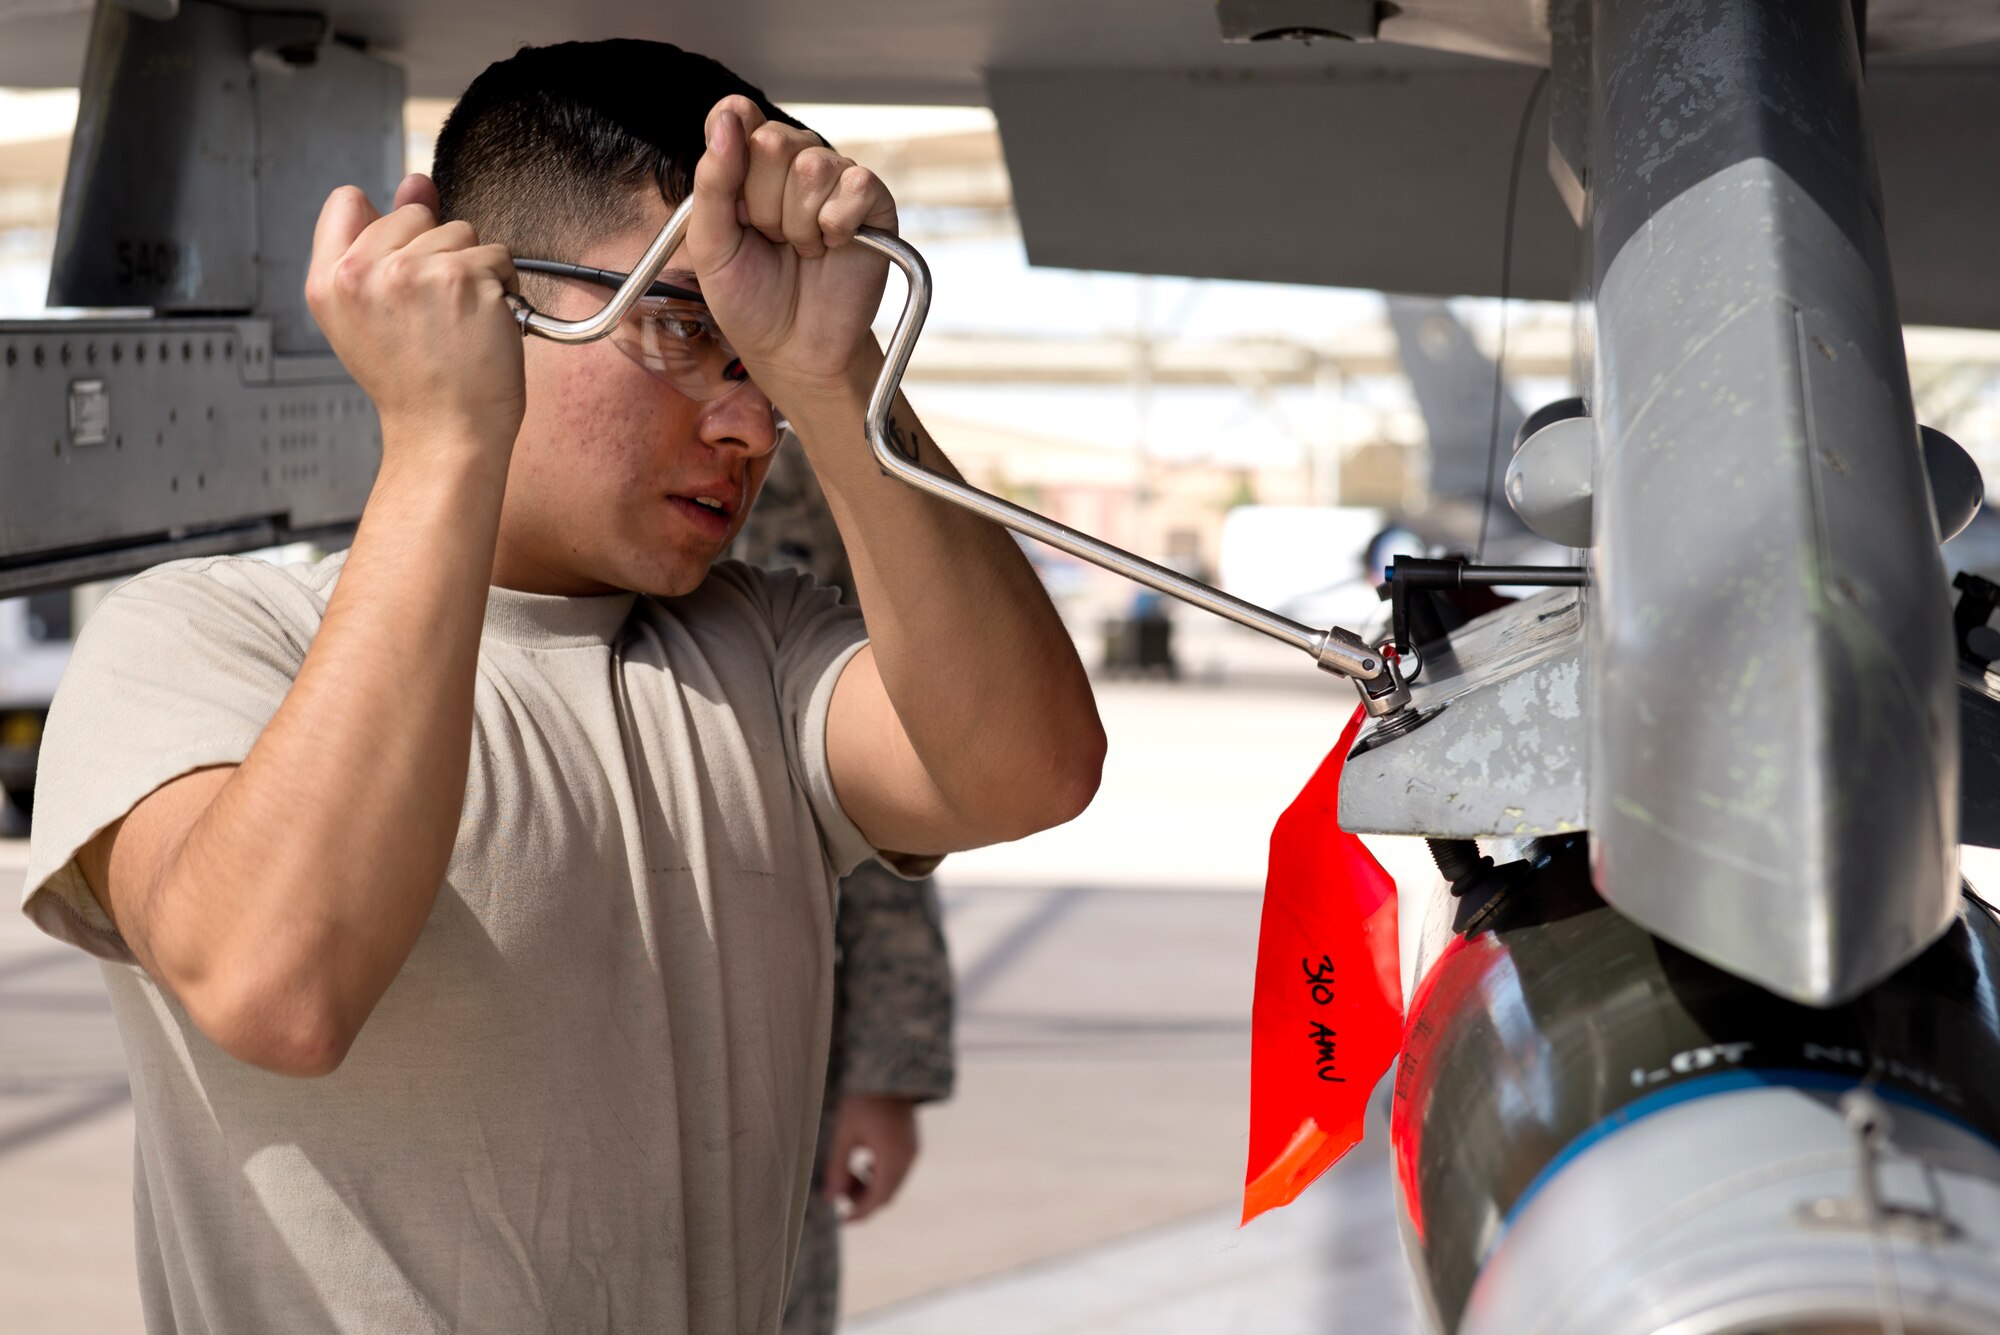 Airman Michael Gutierrez, 310th Aircraft Maintenance Unit weapons load crew member, attaches an inert bomb to an F-16 Fighting Falcon during the 2018 1st Quarter Load Crew Competition at Luke Air Force Base, Ariz., April 6. Teams of three load crew members used teamwork, communication, and technical knowledge to race to load weapons onto fighter aircraft under the watchful eye of experienced judges. (U.S. Air Force photo by Senior Airman Ridge Shan)